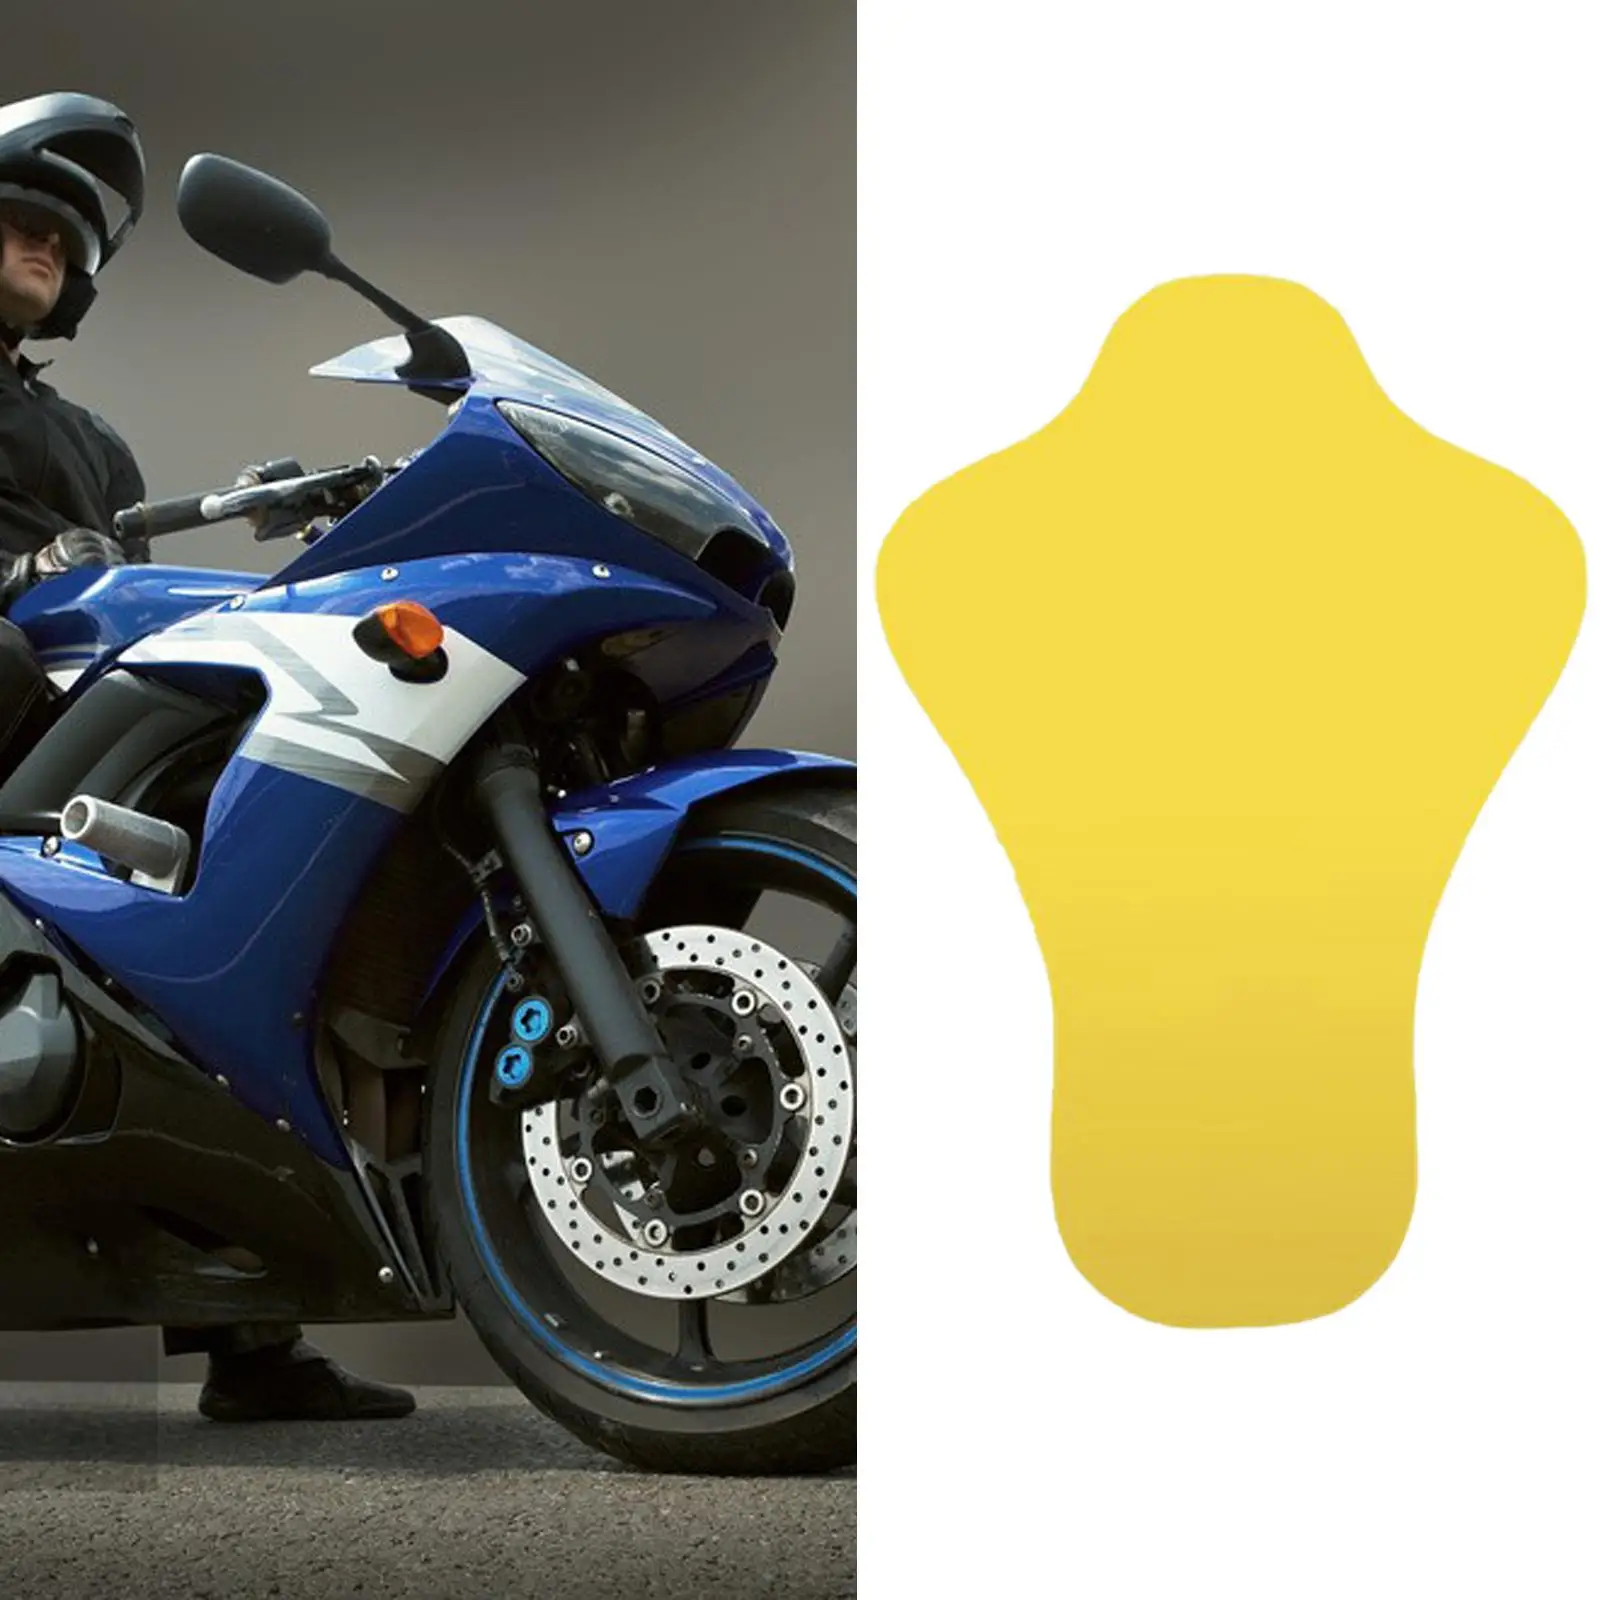   Motorcycle Jacket Insert Armor Protectors Set Motorcycle Protective